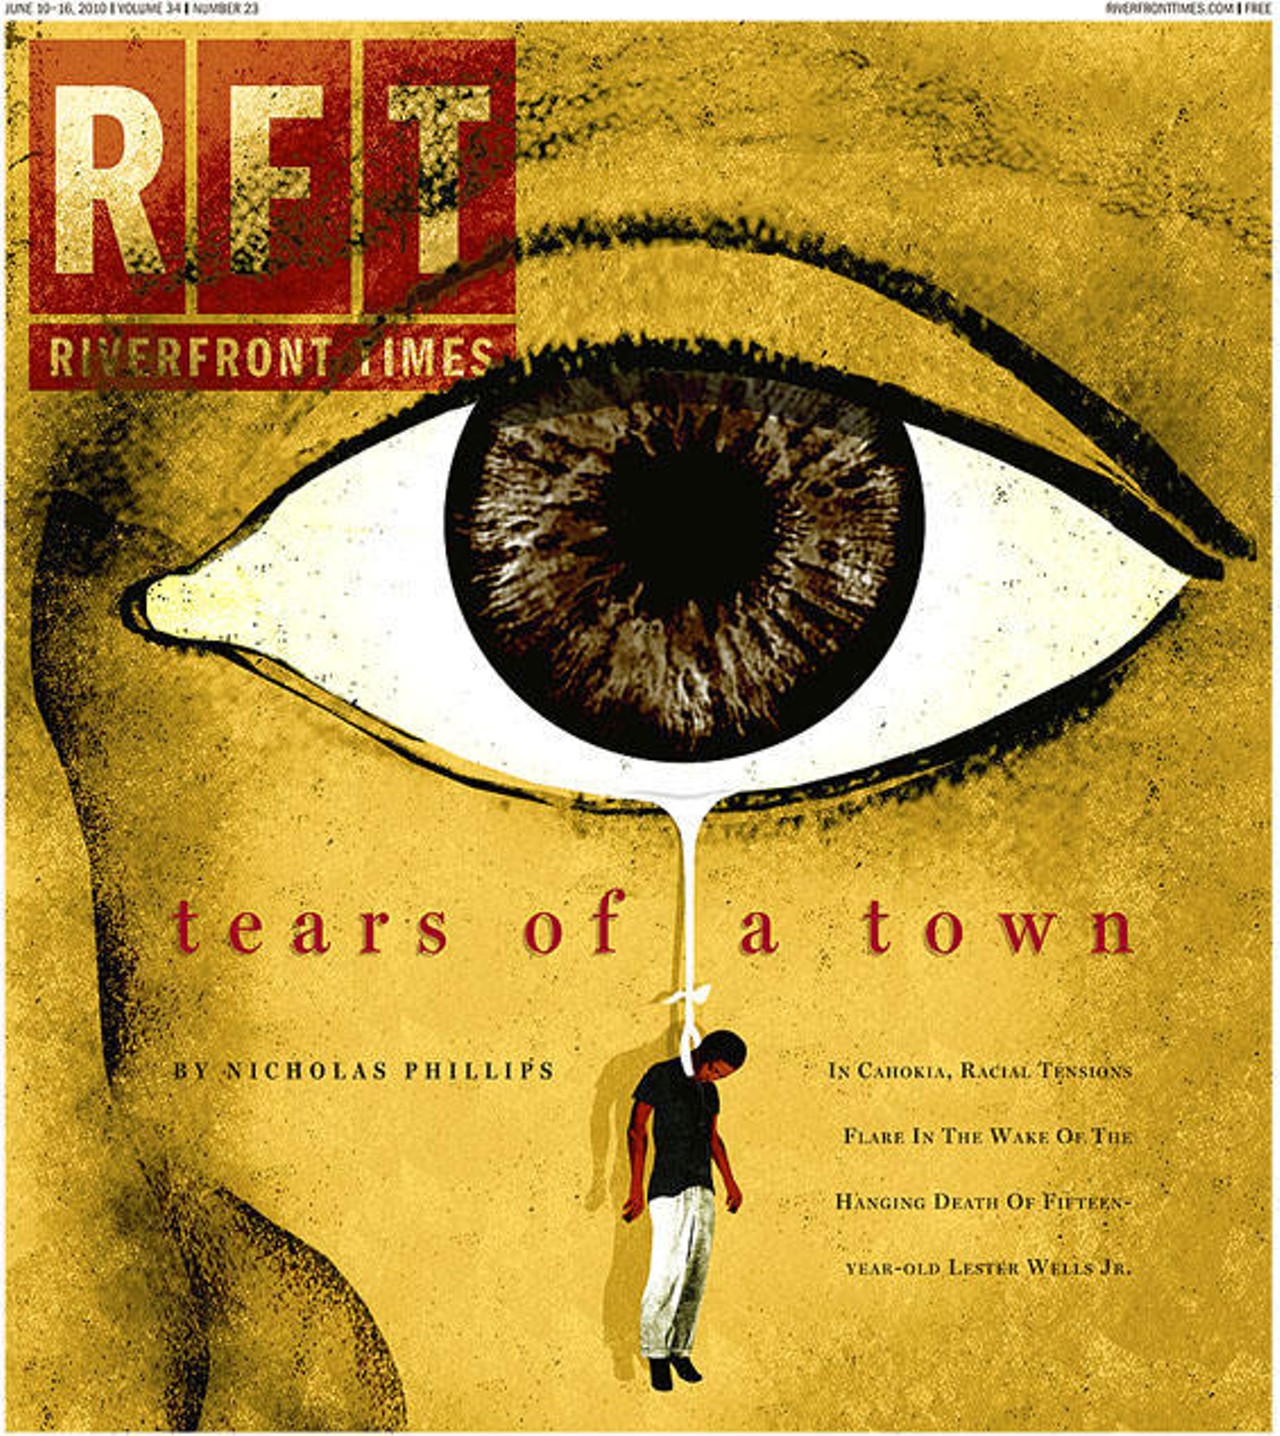 The cover of our June 9 feature story by Nicholas Phillips, "Tears of a Town: Racial tensions flare in the wake of the hanging death of Lester Wells Jr."